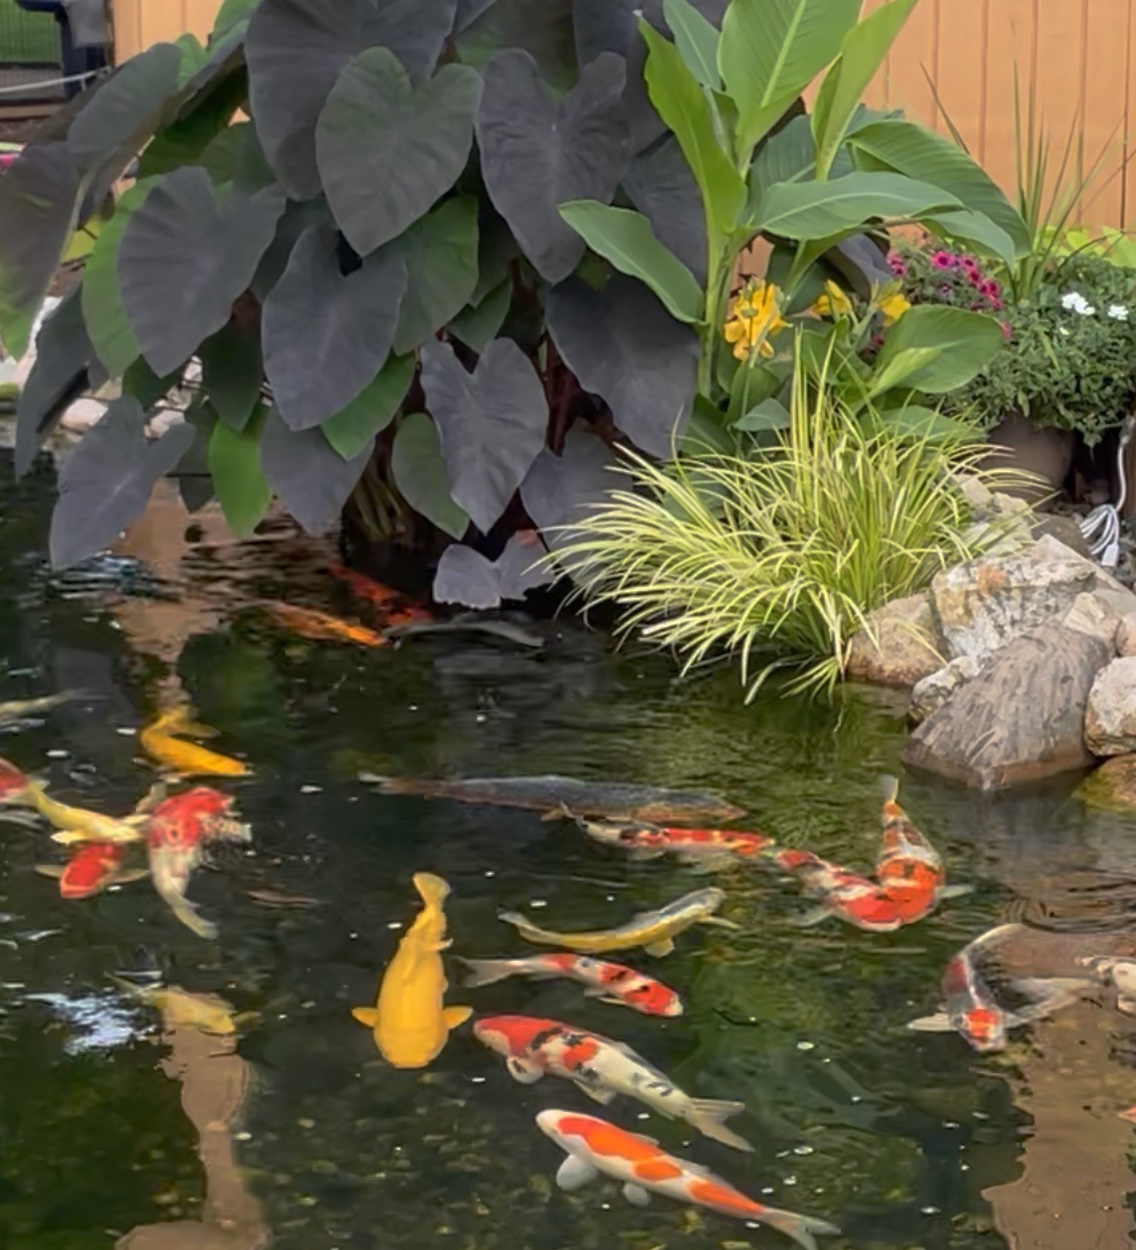 A koi pond with plants behind it.